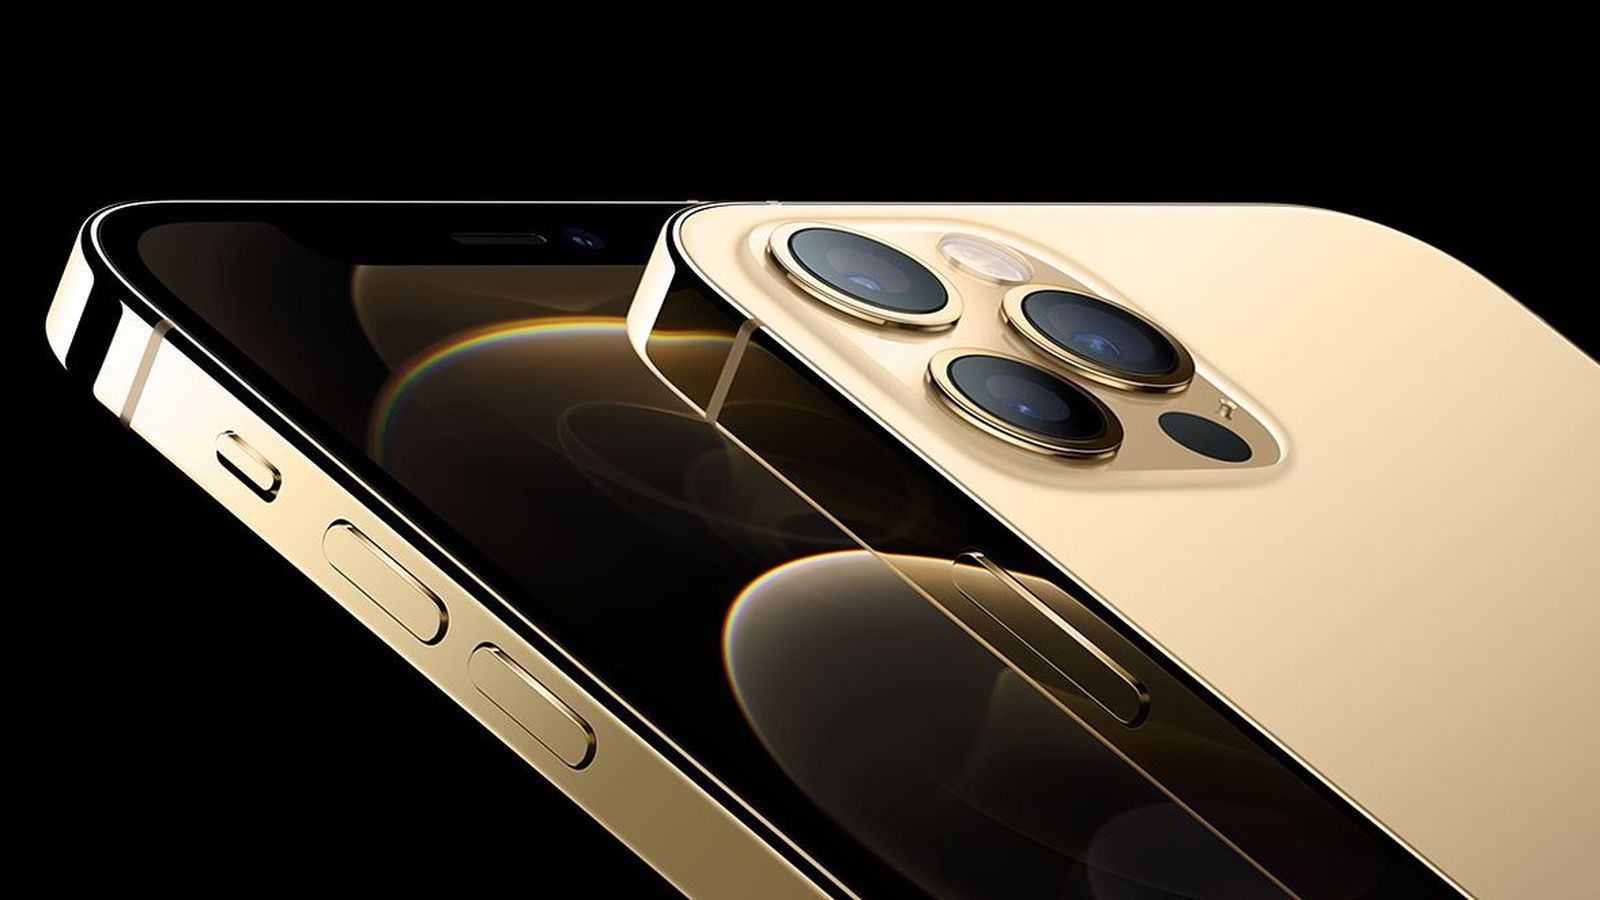 Gold Version Of Iphone 12 Pro Apparently Has A More Fingerprint Resistant Stainless Steel Frame Macrumors